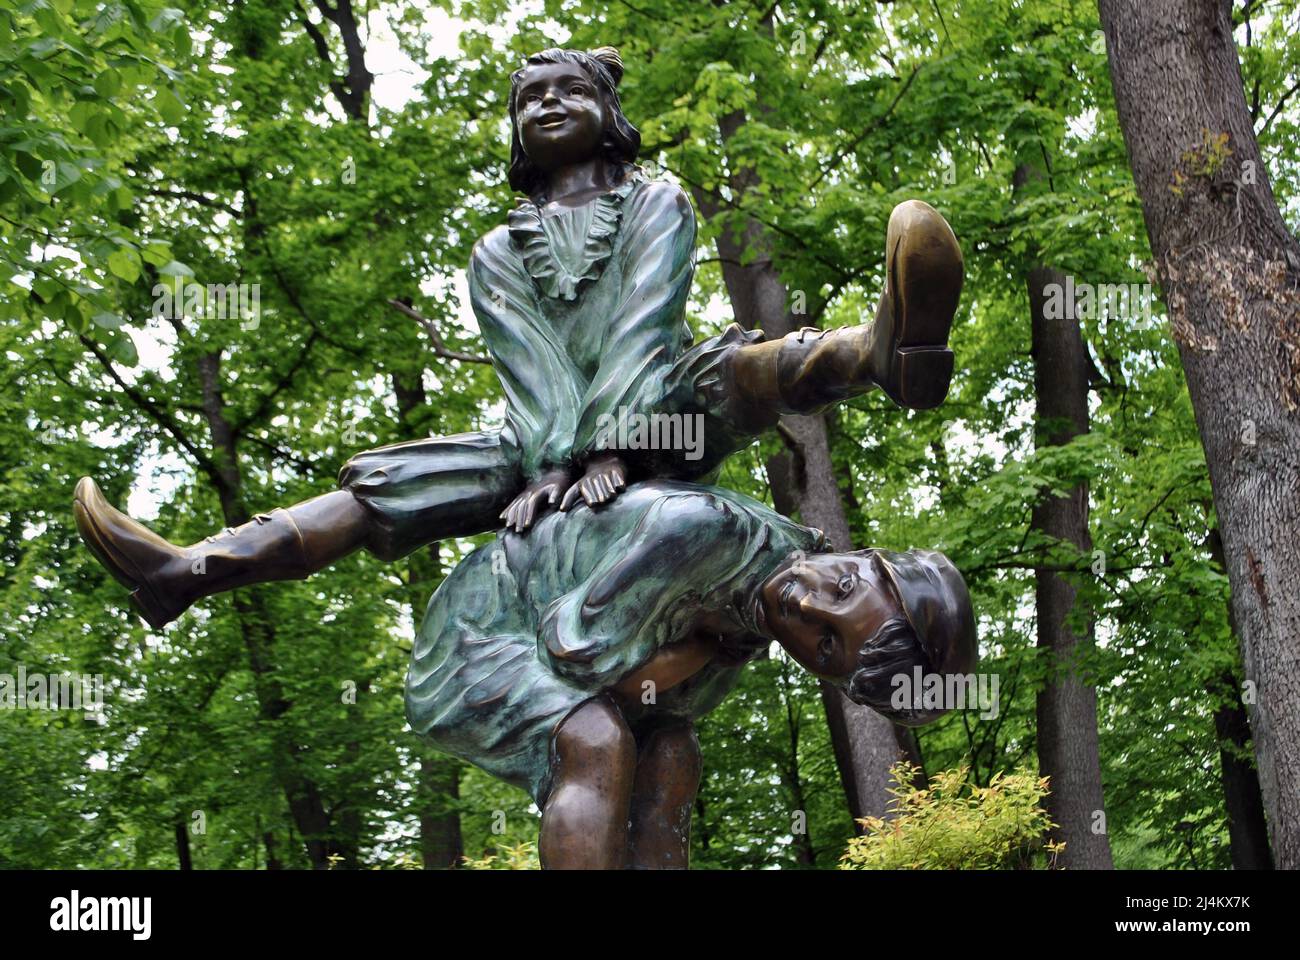 Bronze sculpture in the form of a playing girl jumping over a tilted boy against the background of trees in the park Stock Photo